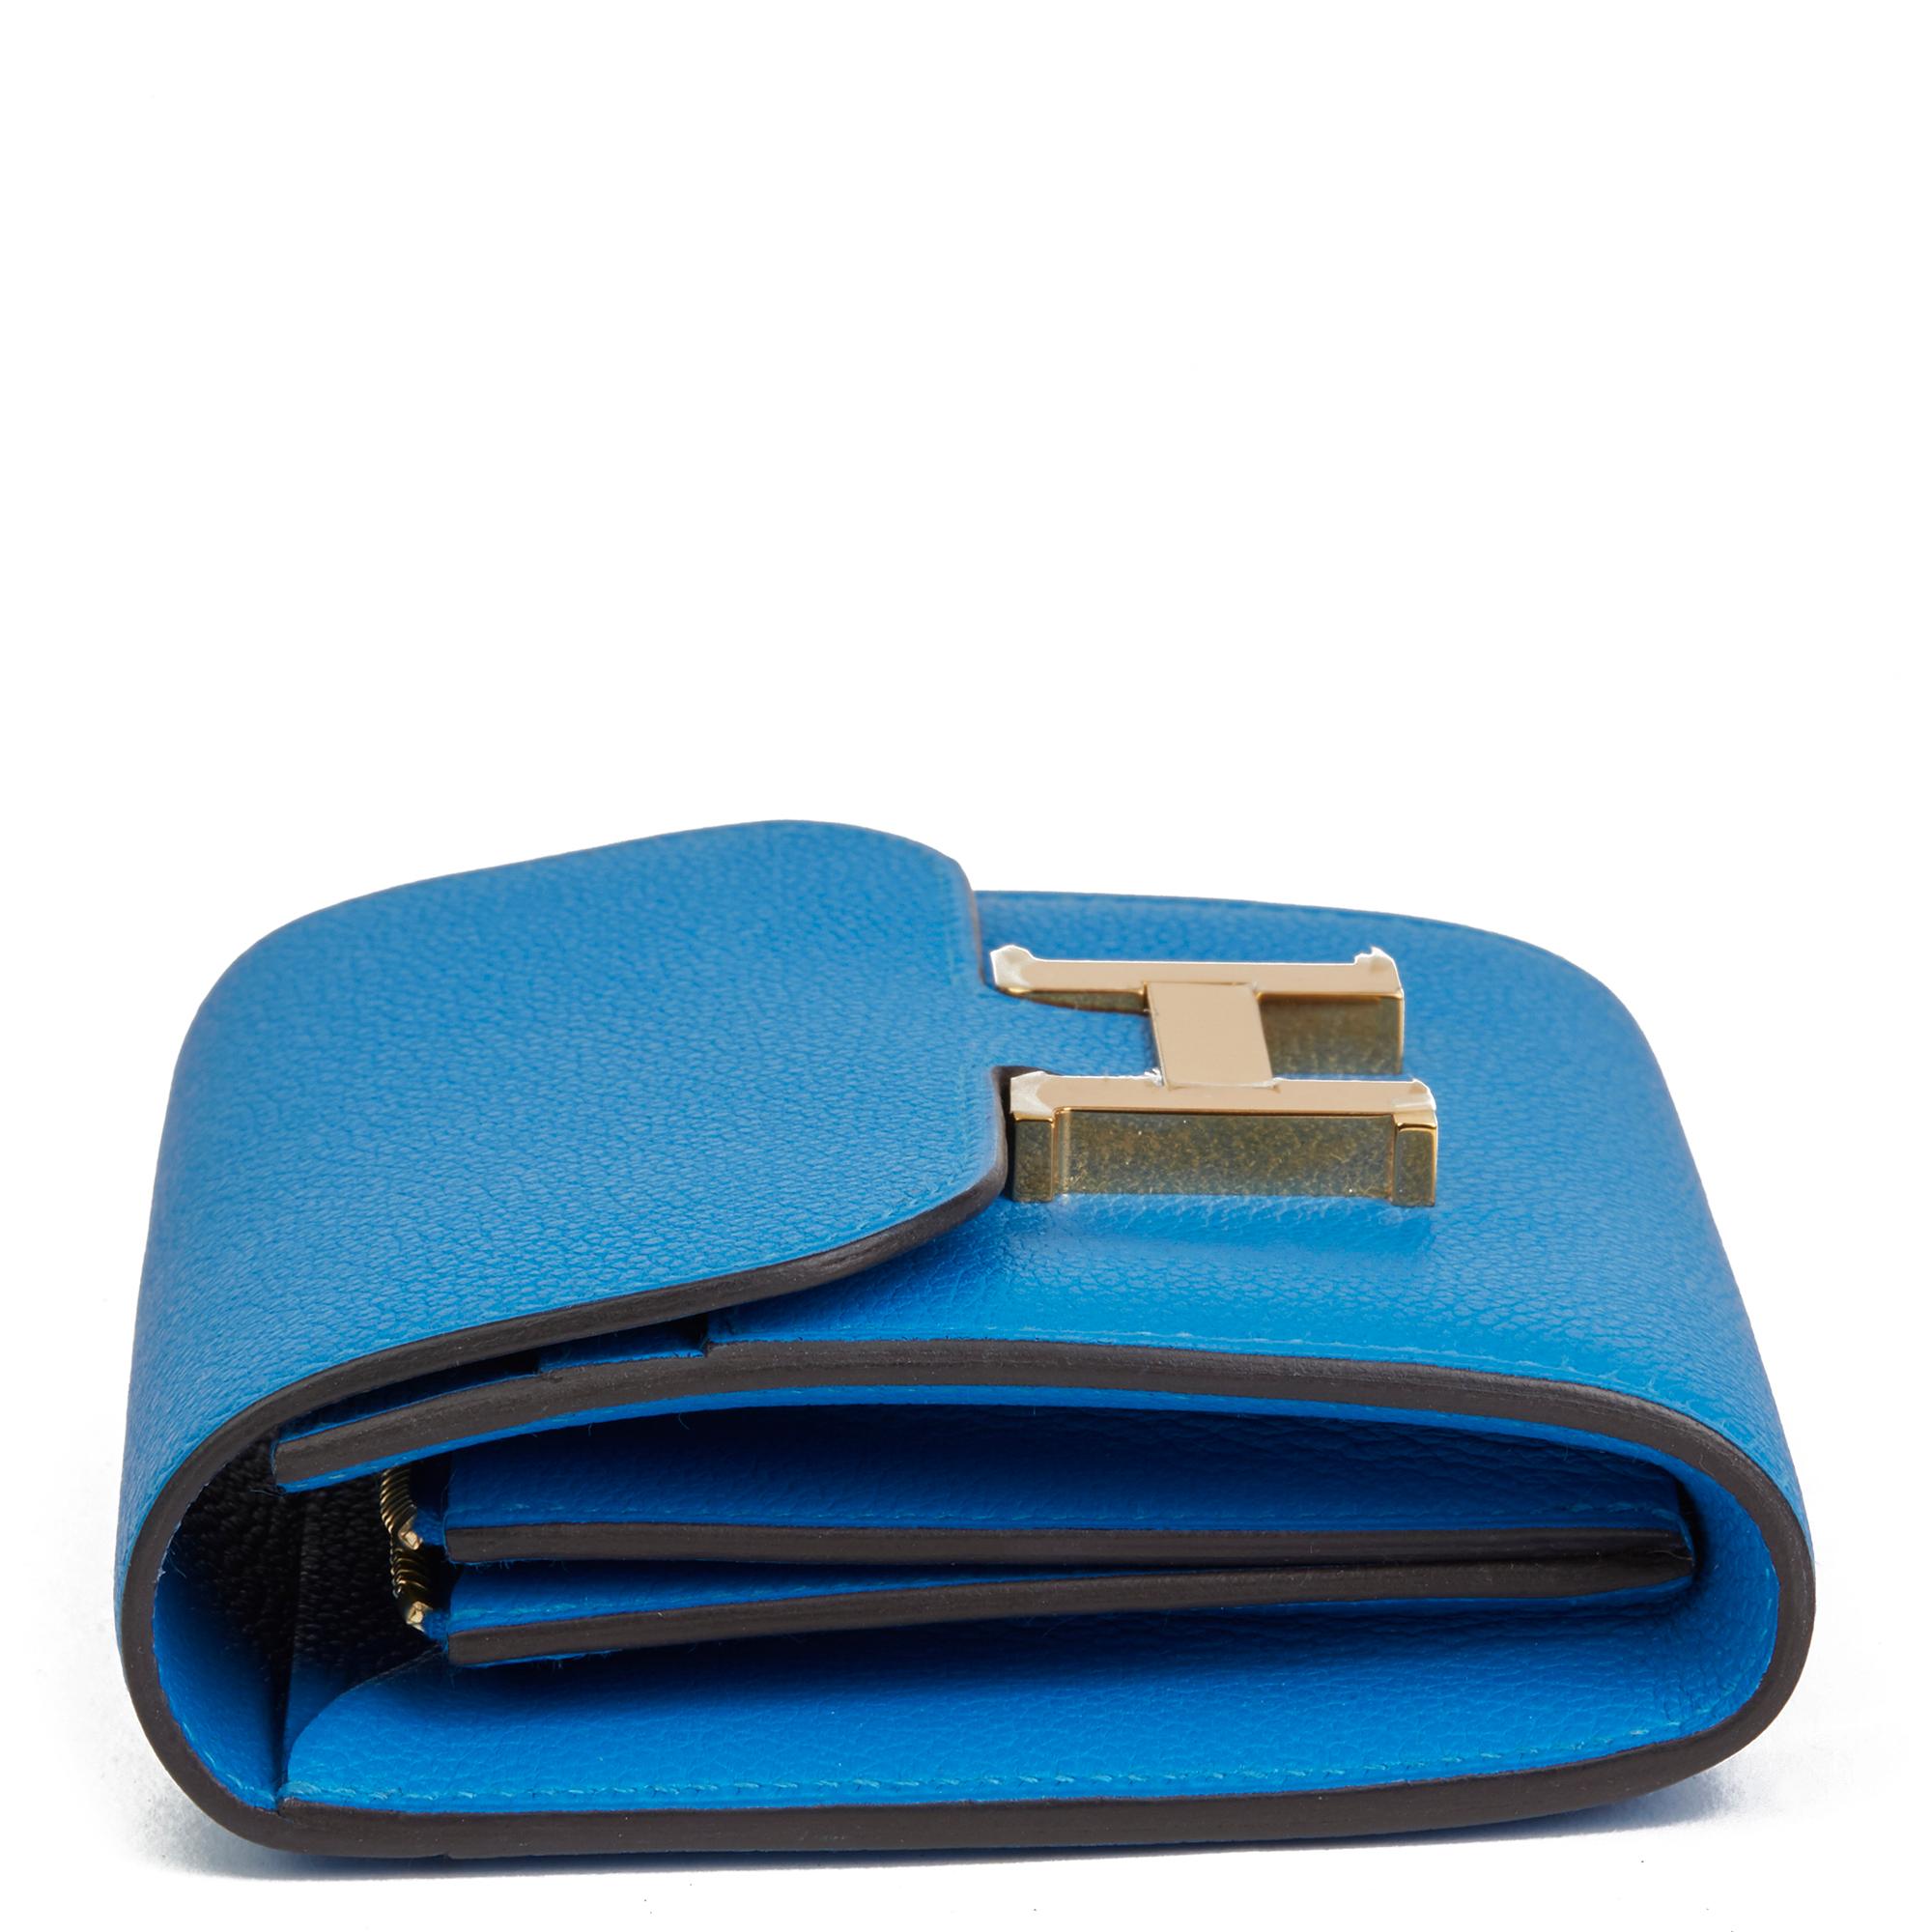 HERMÈS
Blue Hydra Evercolor Leather Constance Compact Wallet

Reference: HB2506
Serial Number: C
Age (Circa): 2018
Accompanied By: Hermès Dust Bag, Box, Protective Felt
Authenticity Details: Date Stamp (Made in France)
Gender: Ladies
Type: